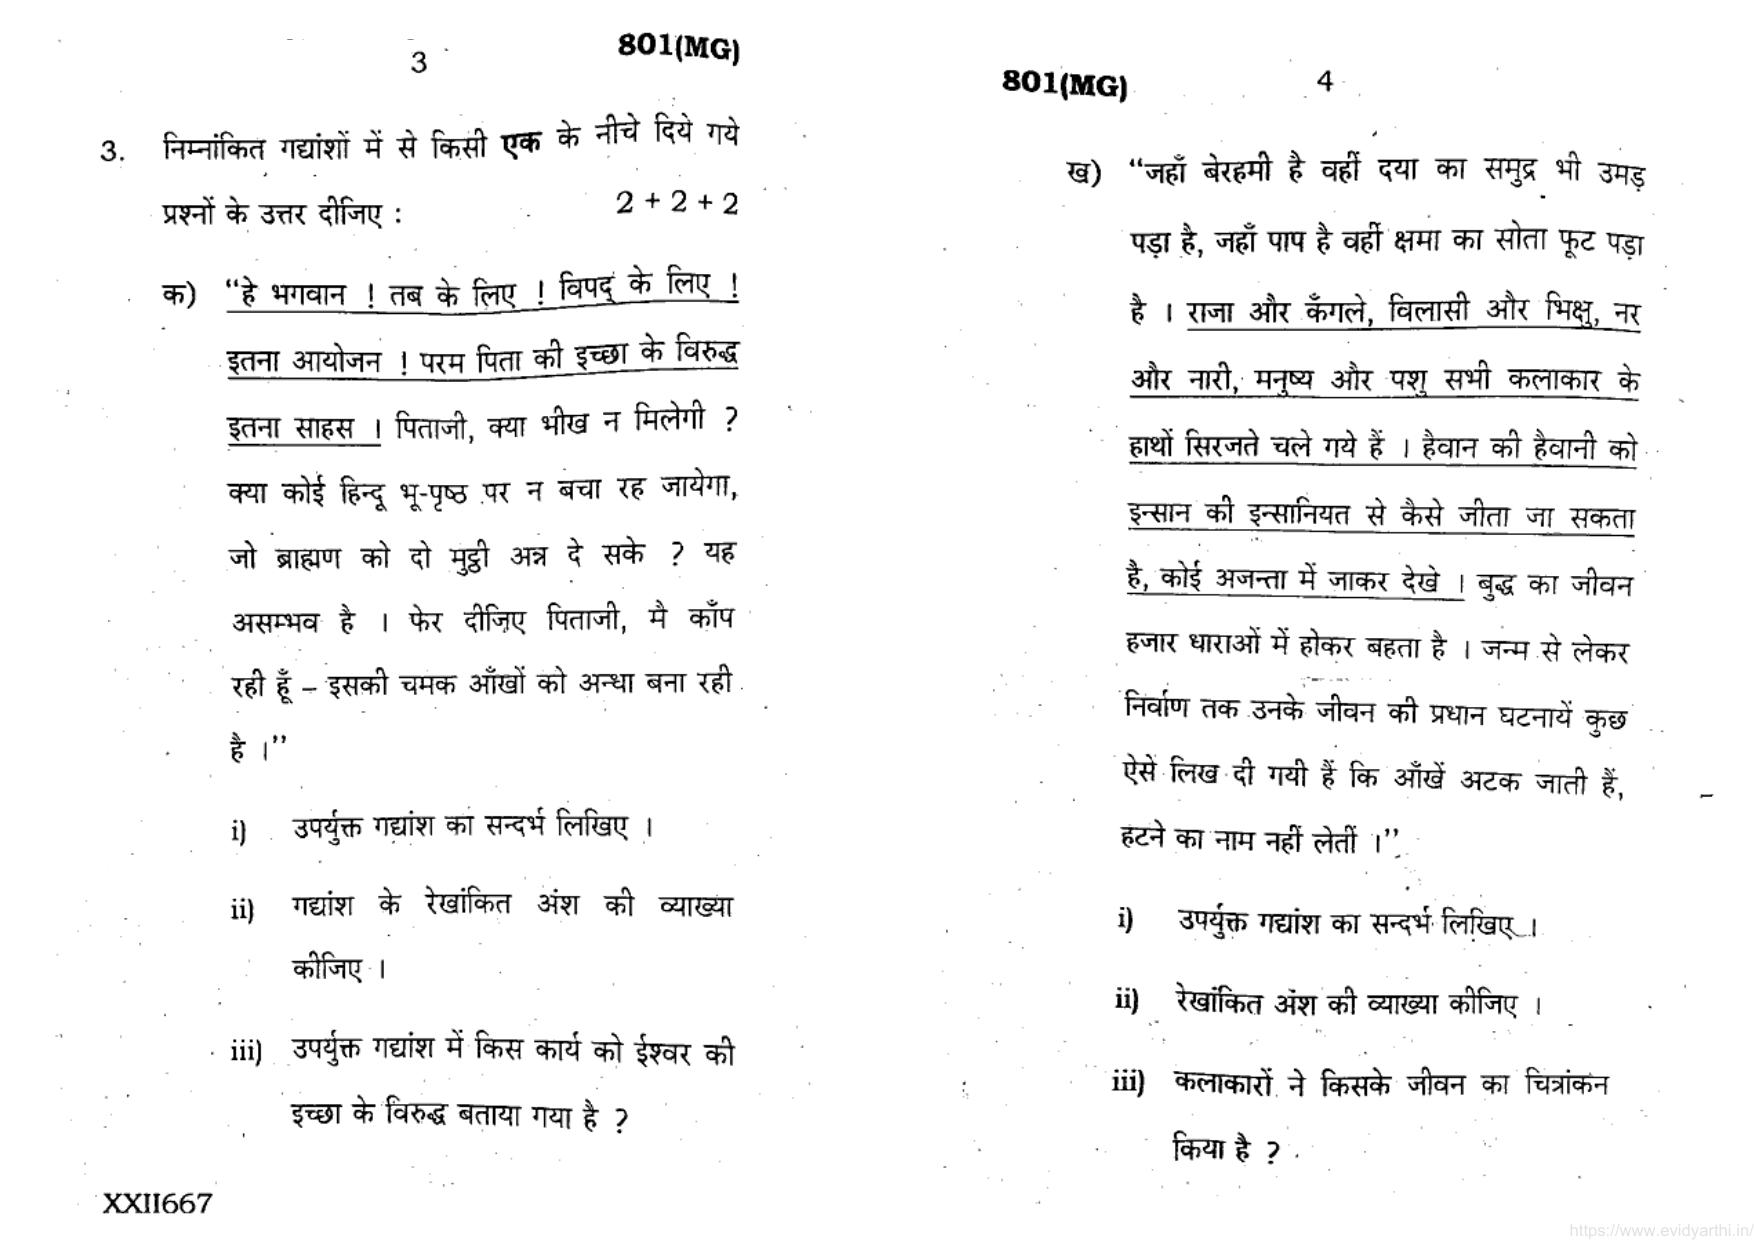 UP Board Previous Year Question Paper Class 10 Hindi (801 MG) – 2020 - Page 2